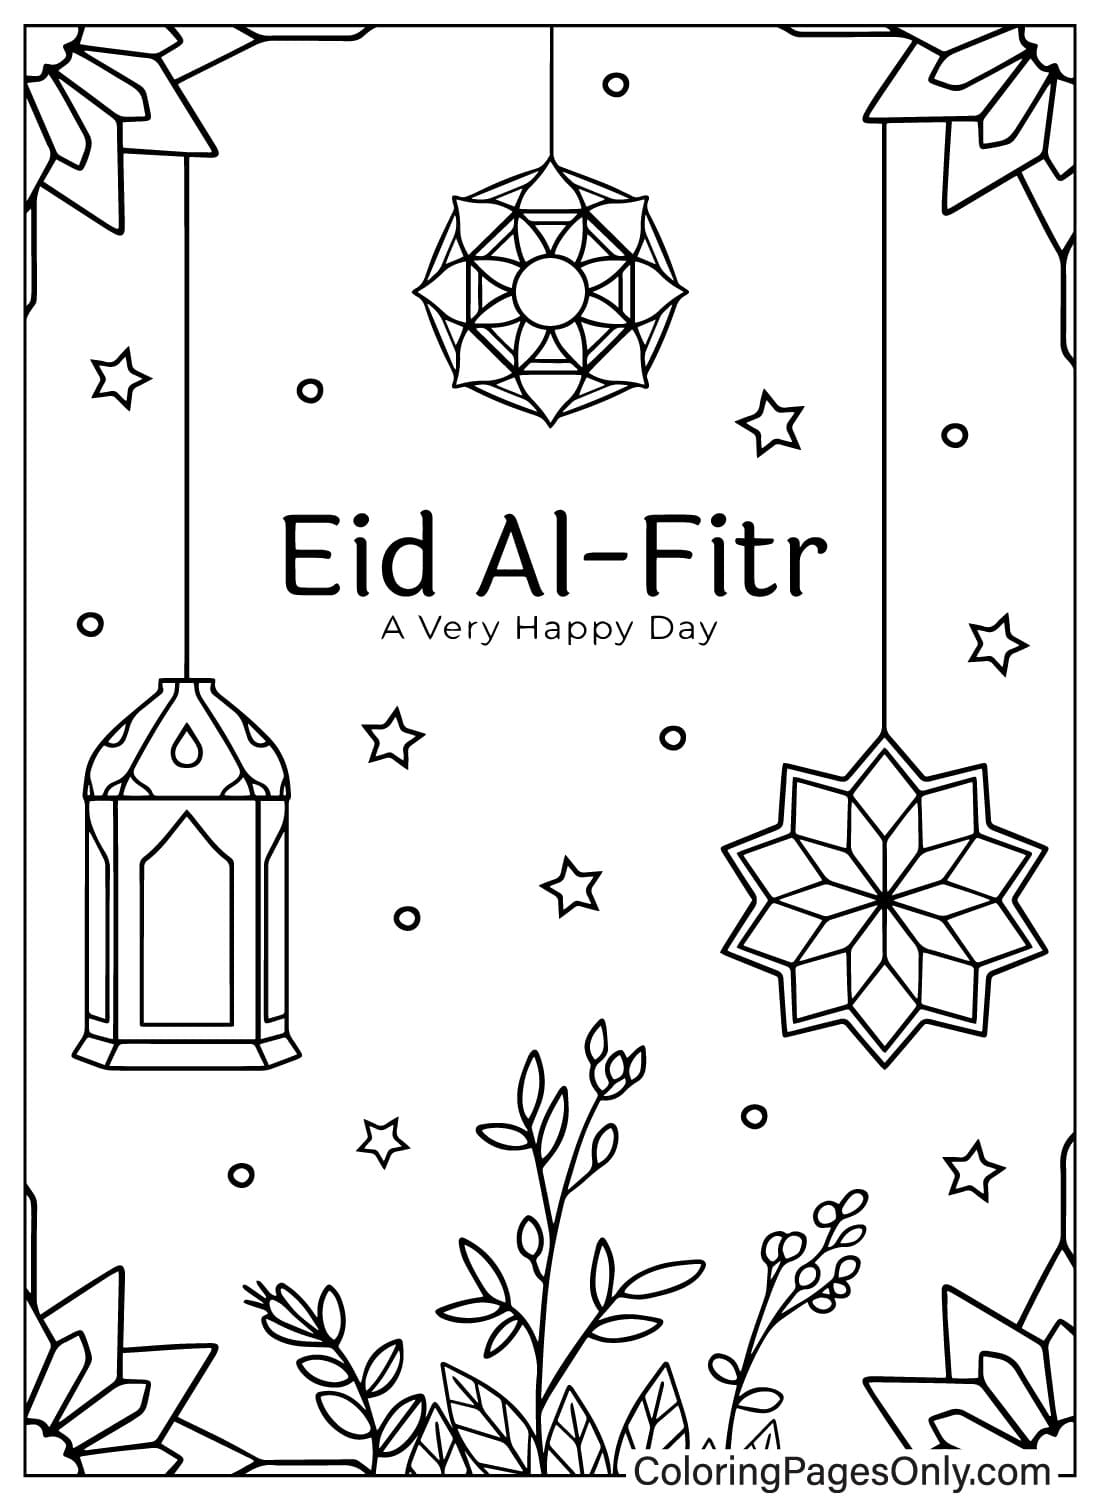 Images Eid Al-Fitr Coloring Page from Eid Al-Fitr